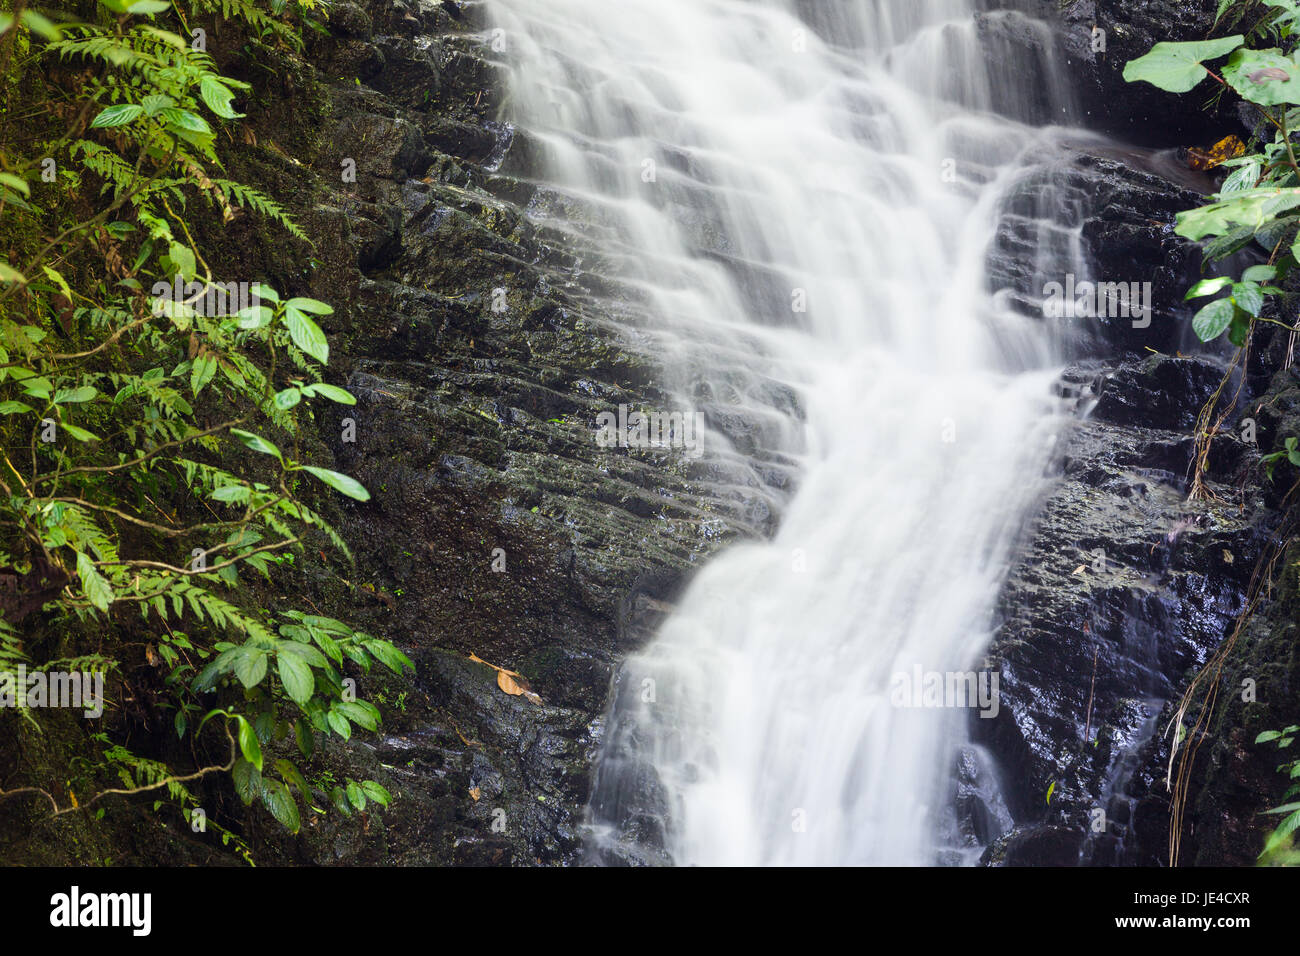 Small waterfall in monteverde cloud forest reserve Costa Rica Stock Photo